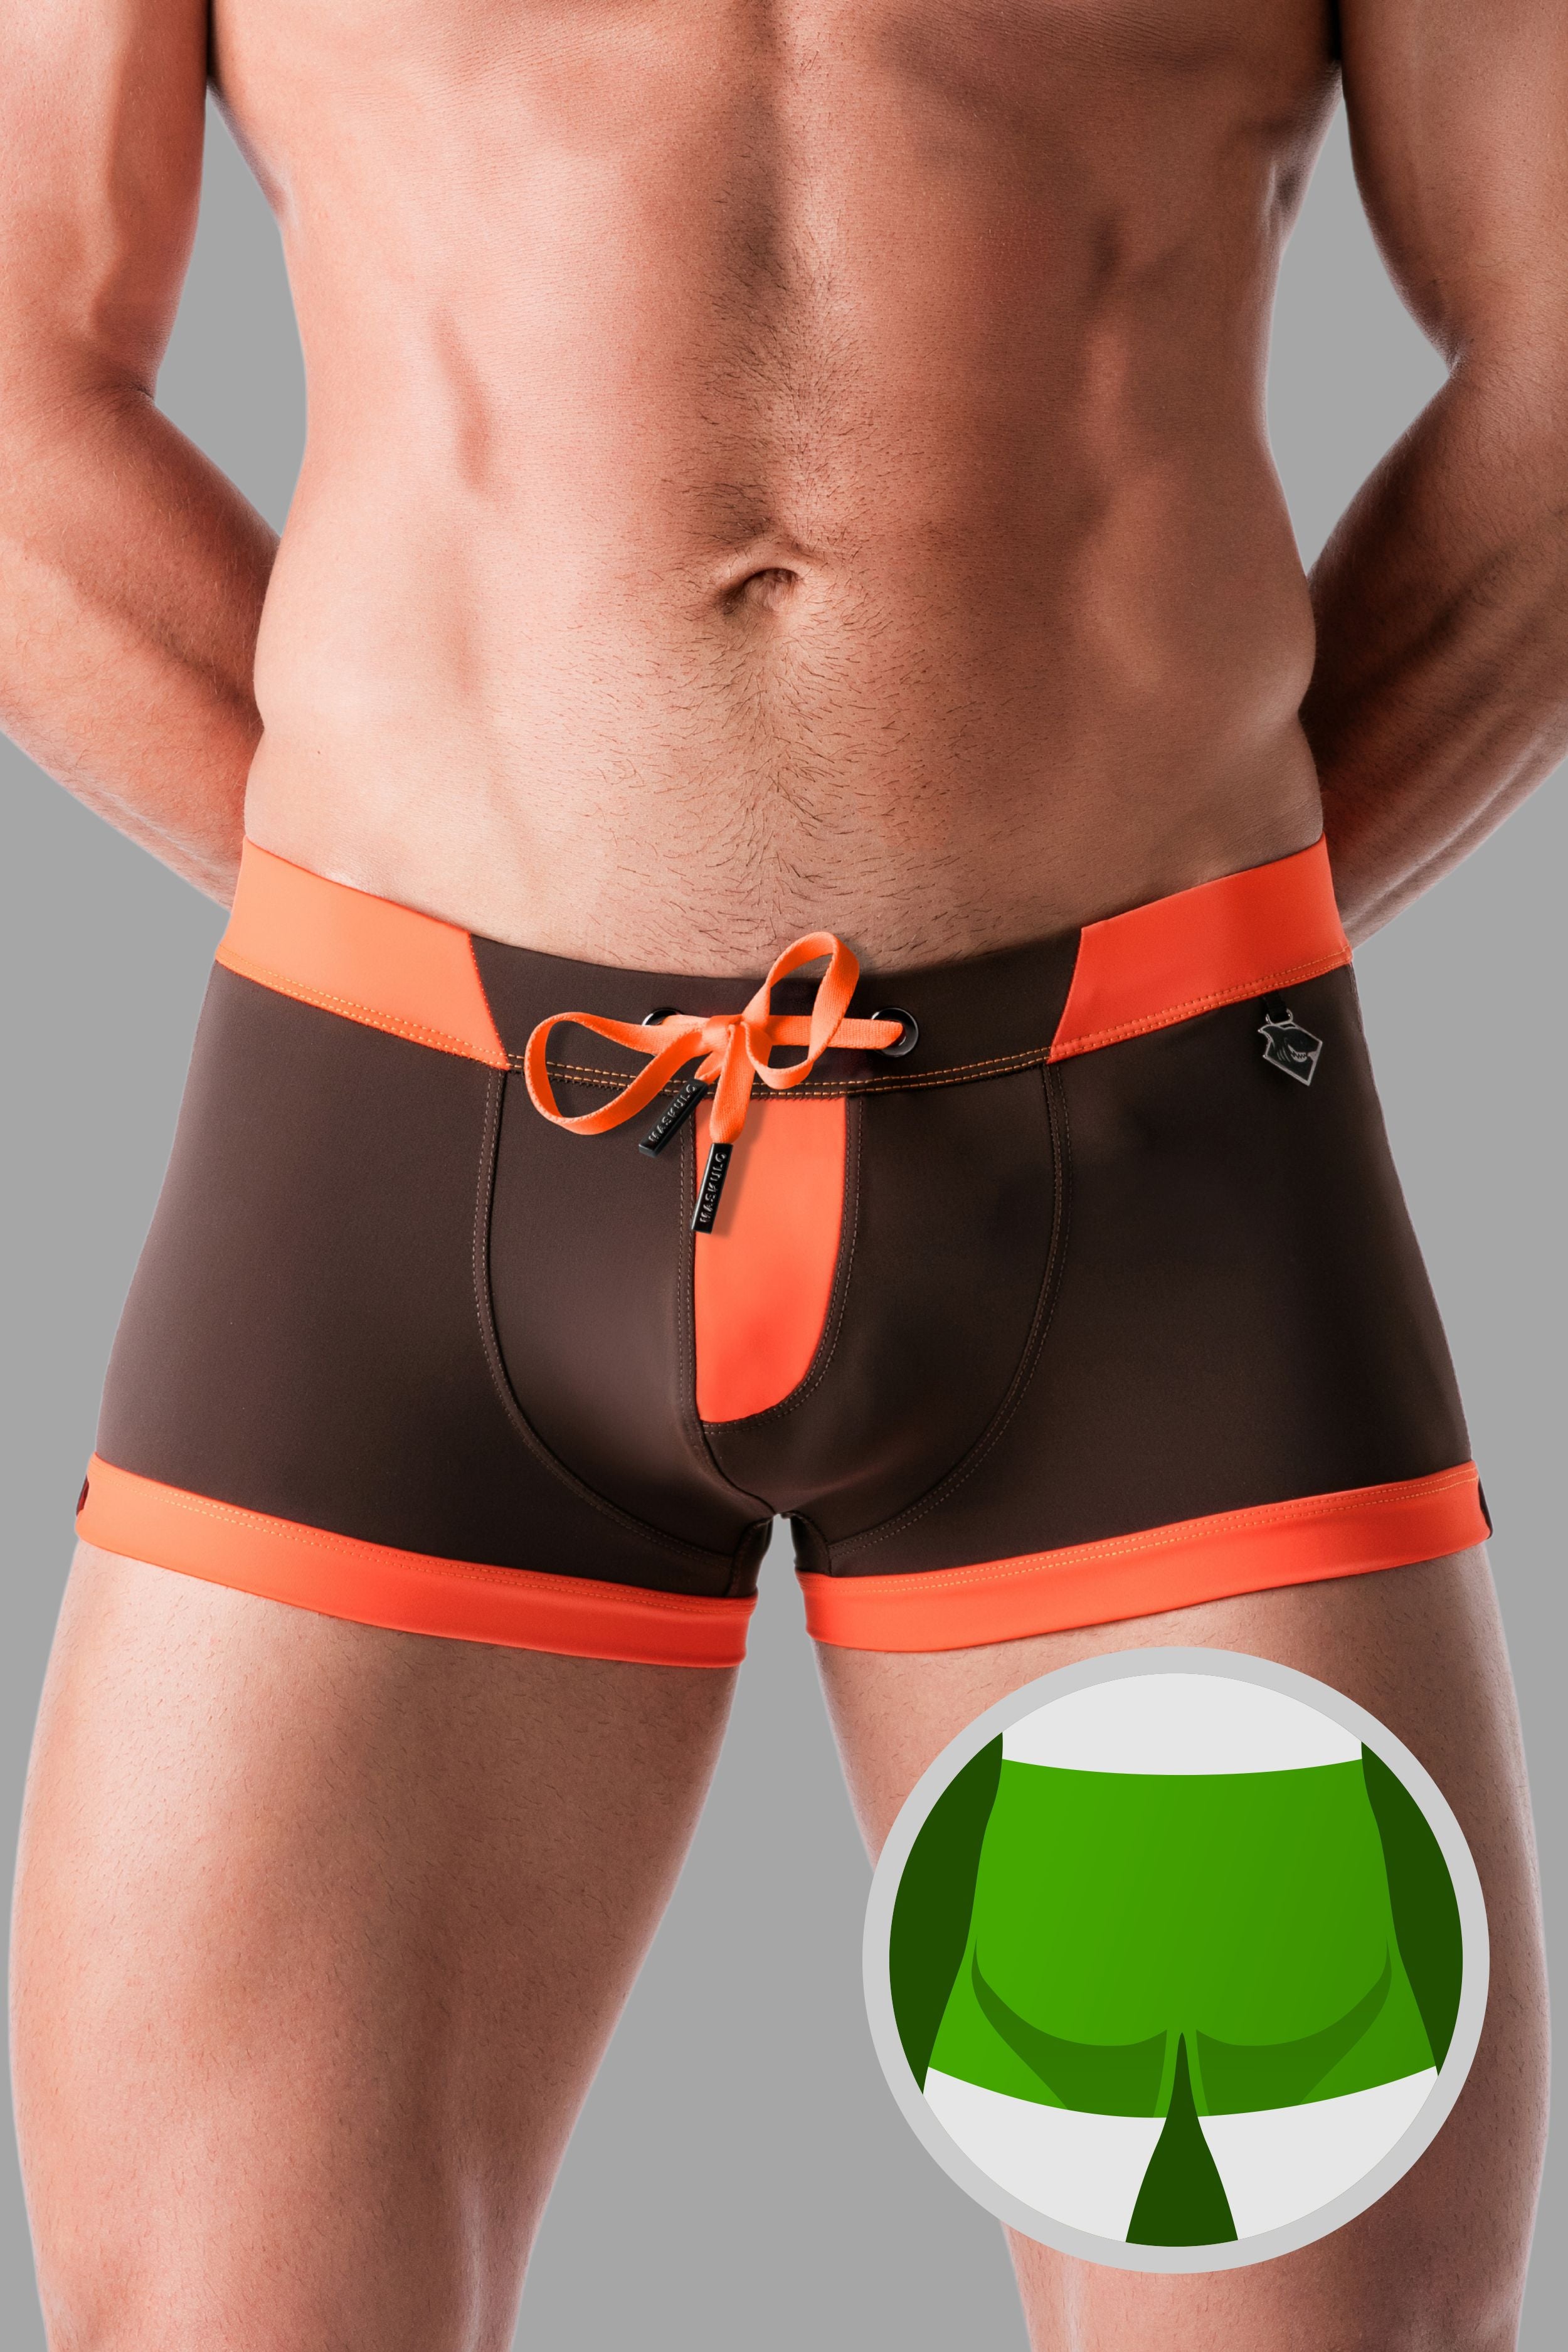 Swimming Trunk Shorts with Zip Imitation on the Front. Brown+Orange